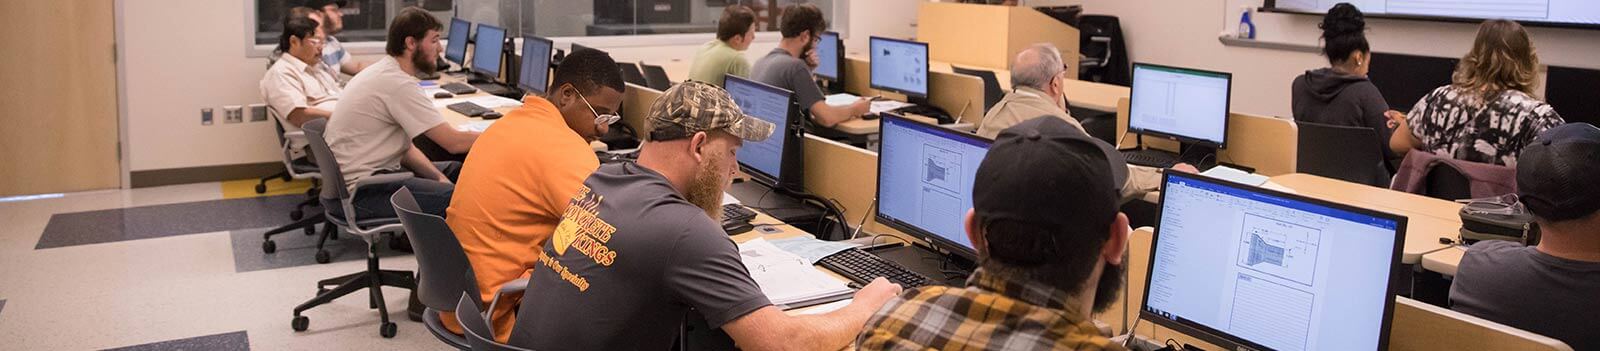 Students In Computer Lab